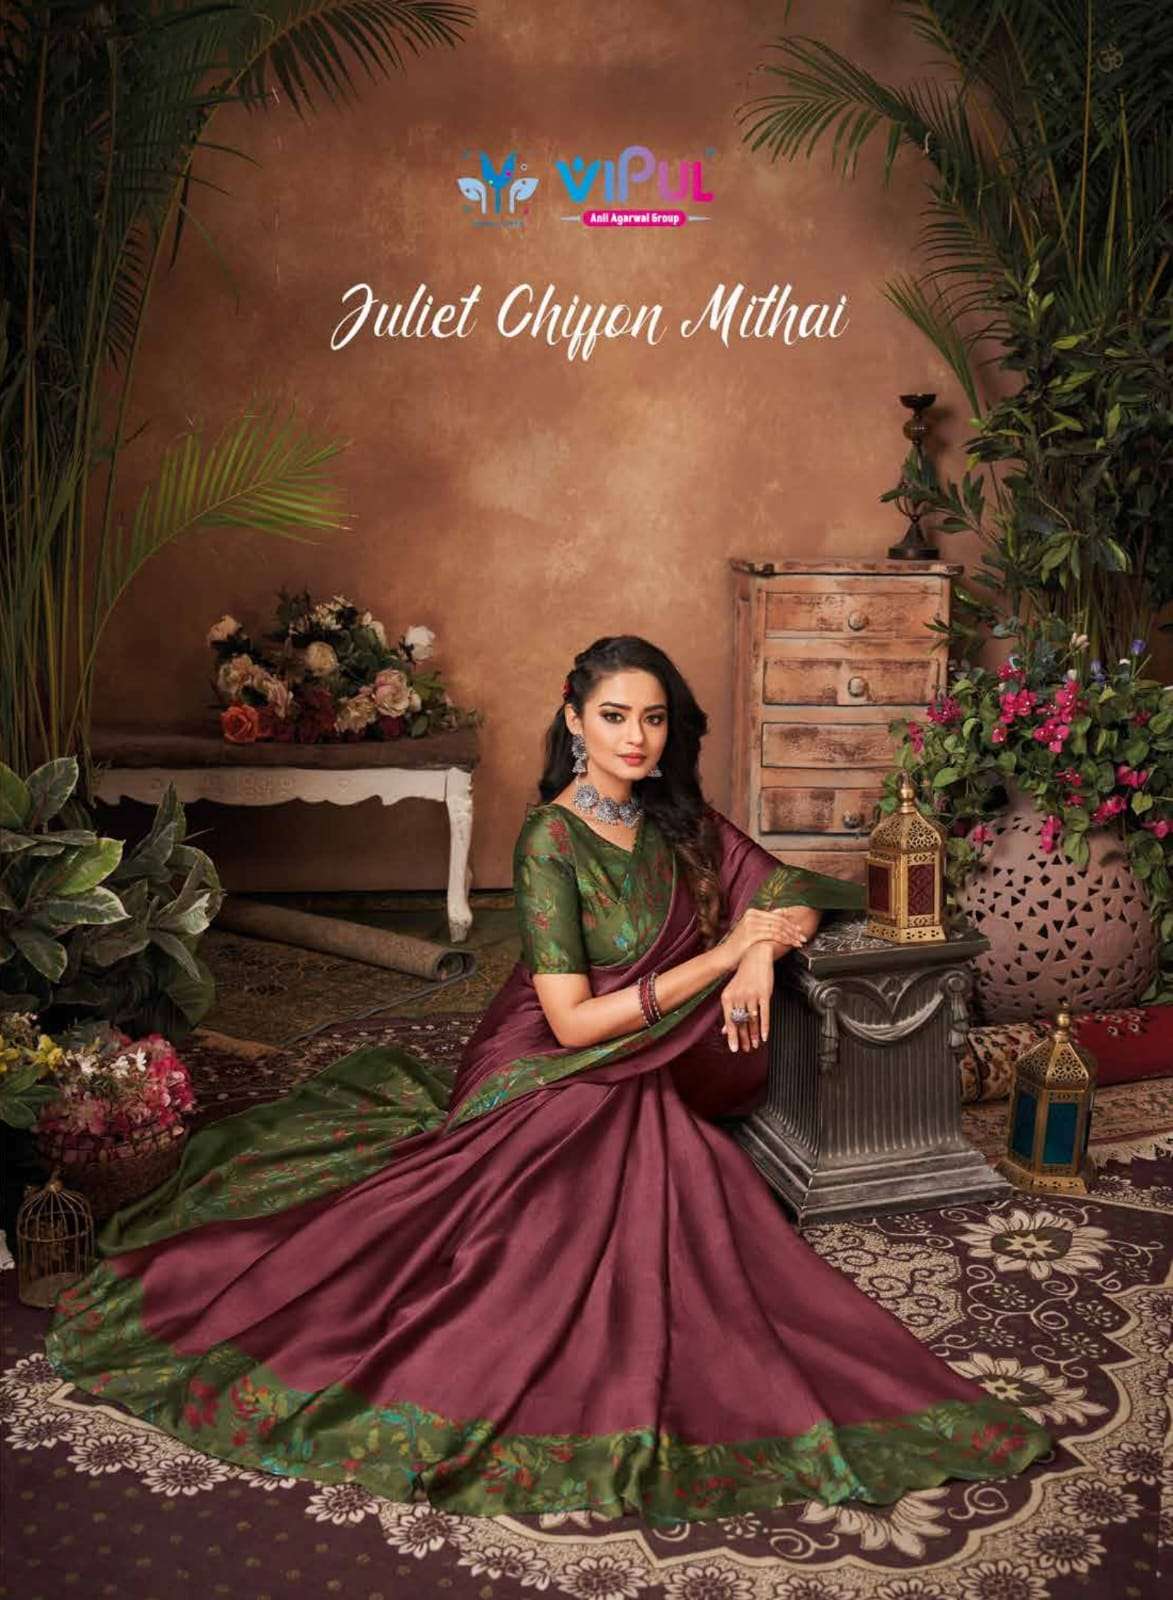 juliet chiffon mithai by vipul printed south indian best saree supplier